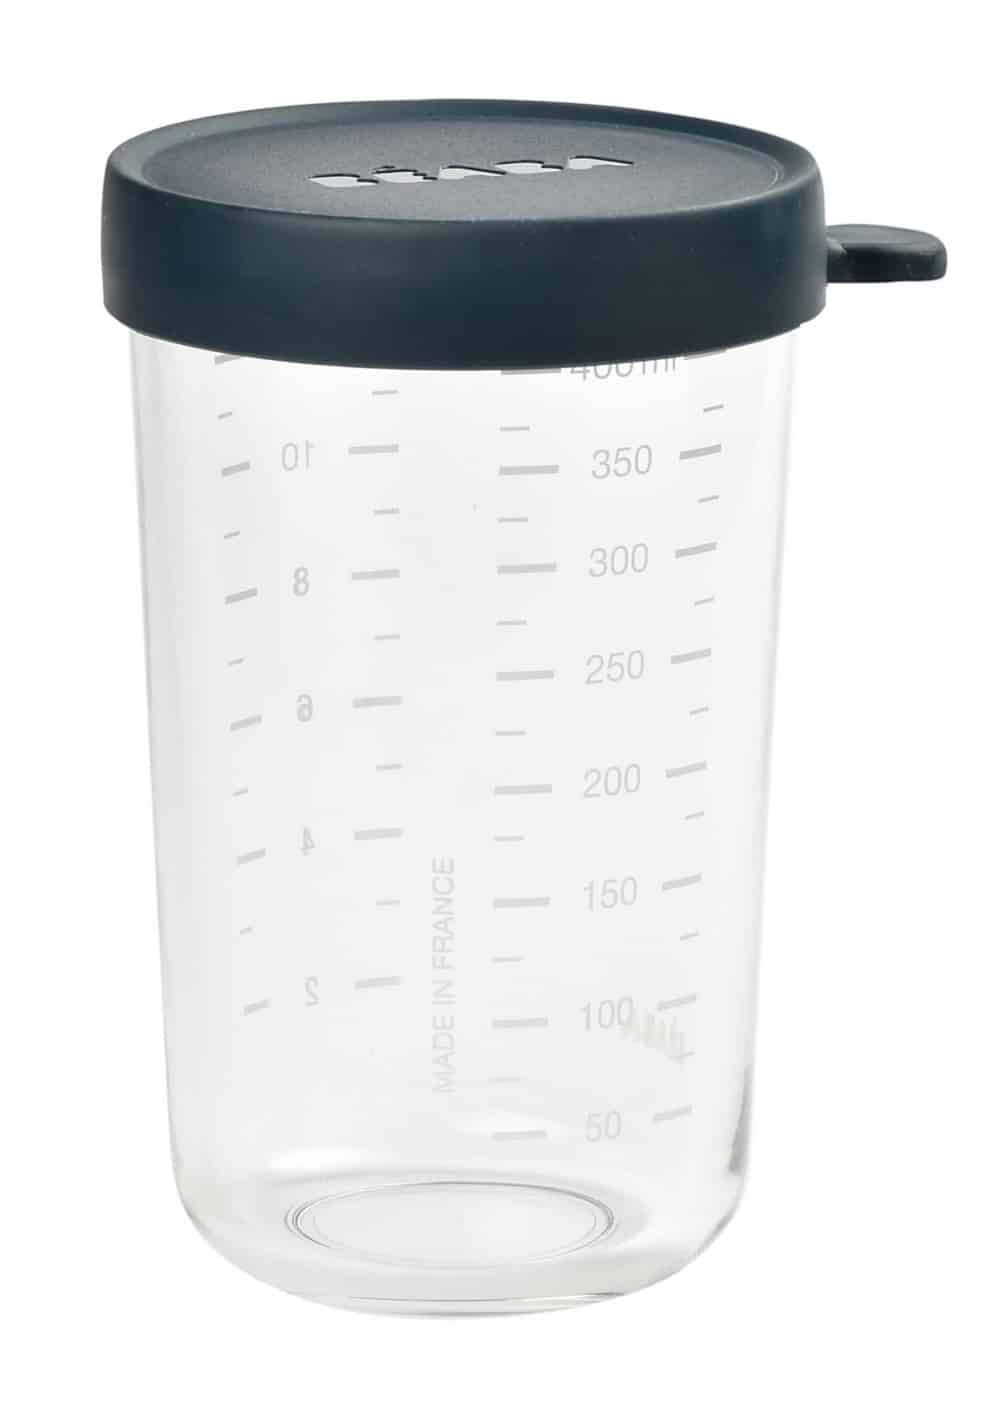 Beaba glass and Silicone Container in midnight 14 oz